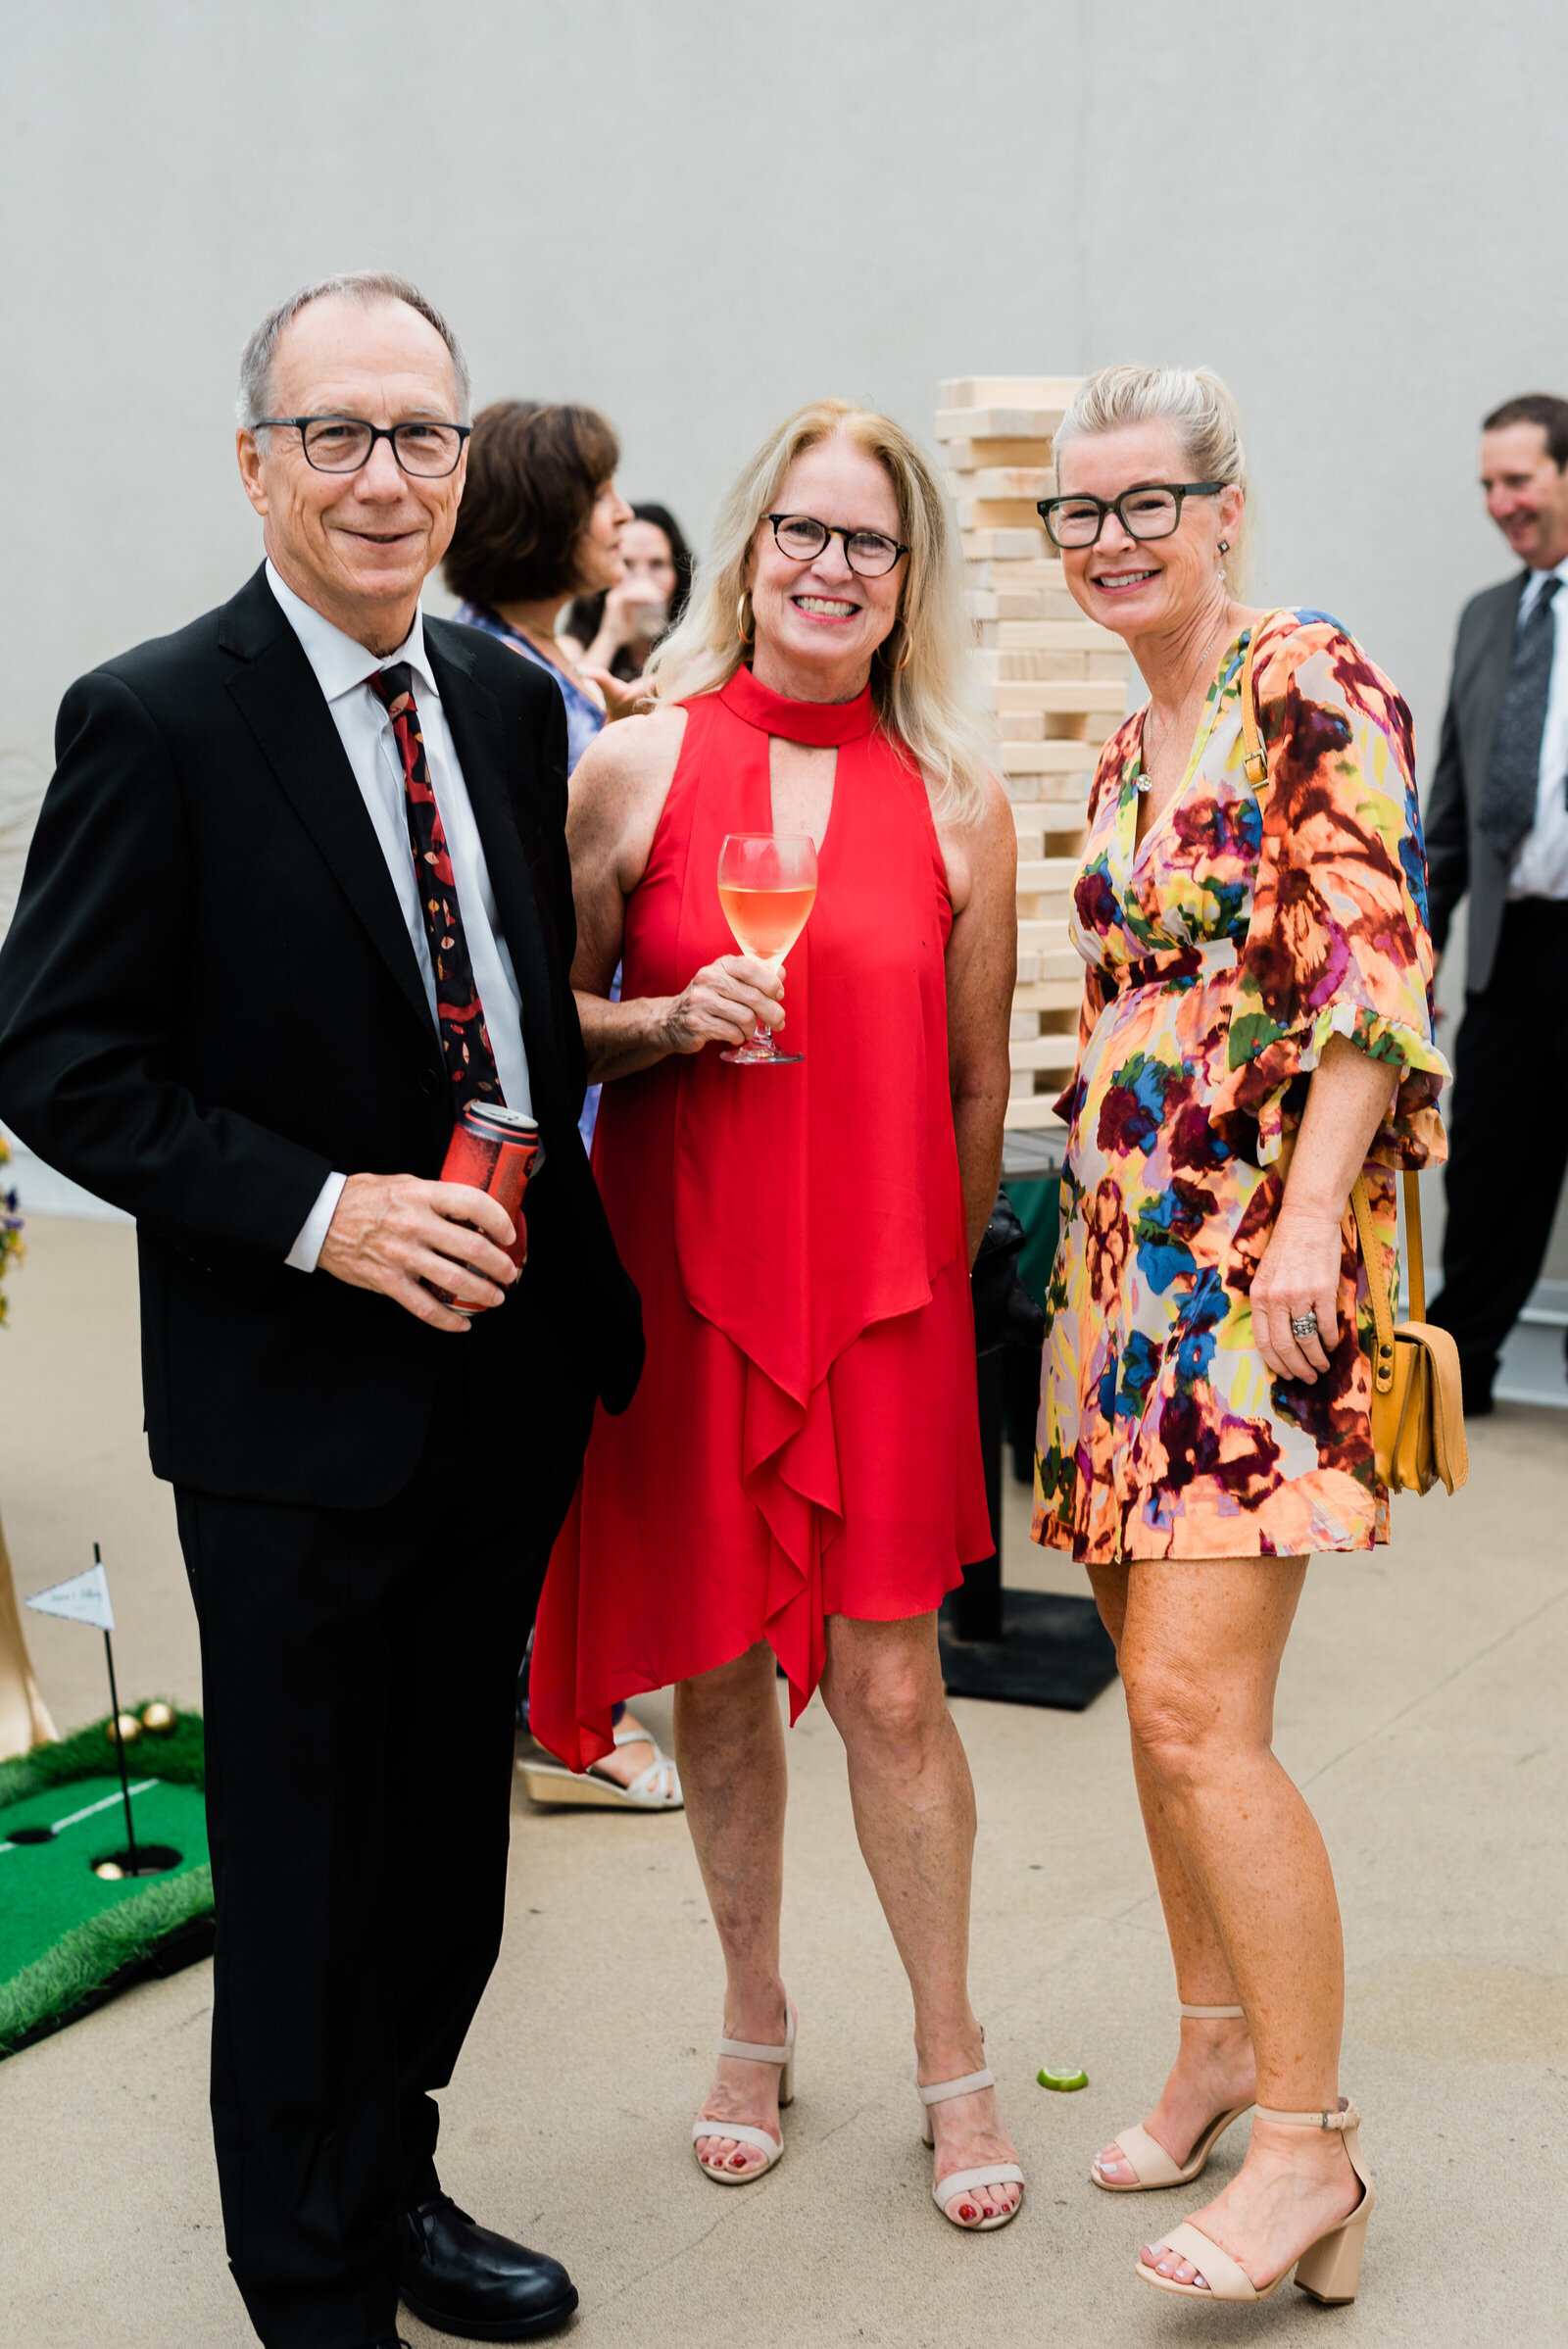 Three wedding guests standing and smiling at the camera